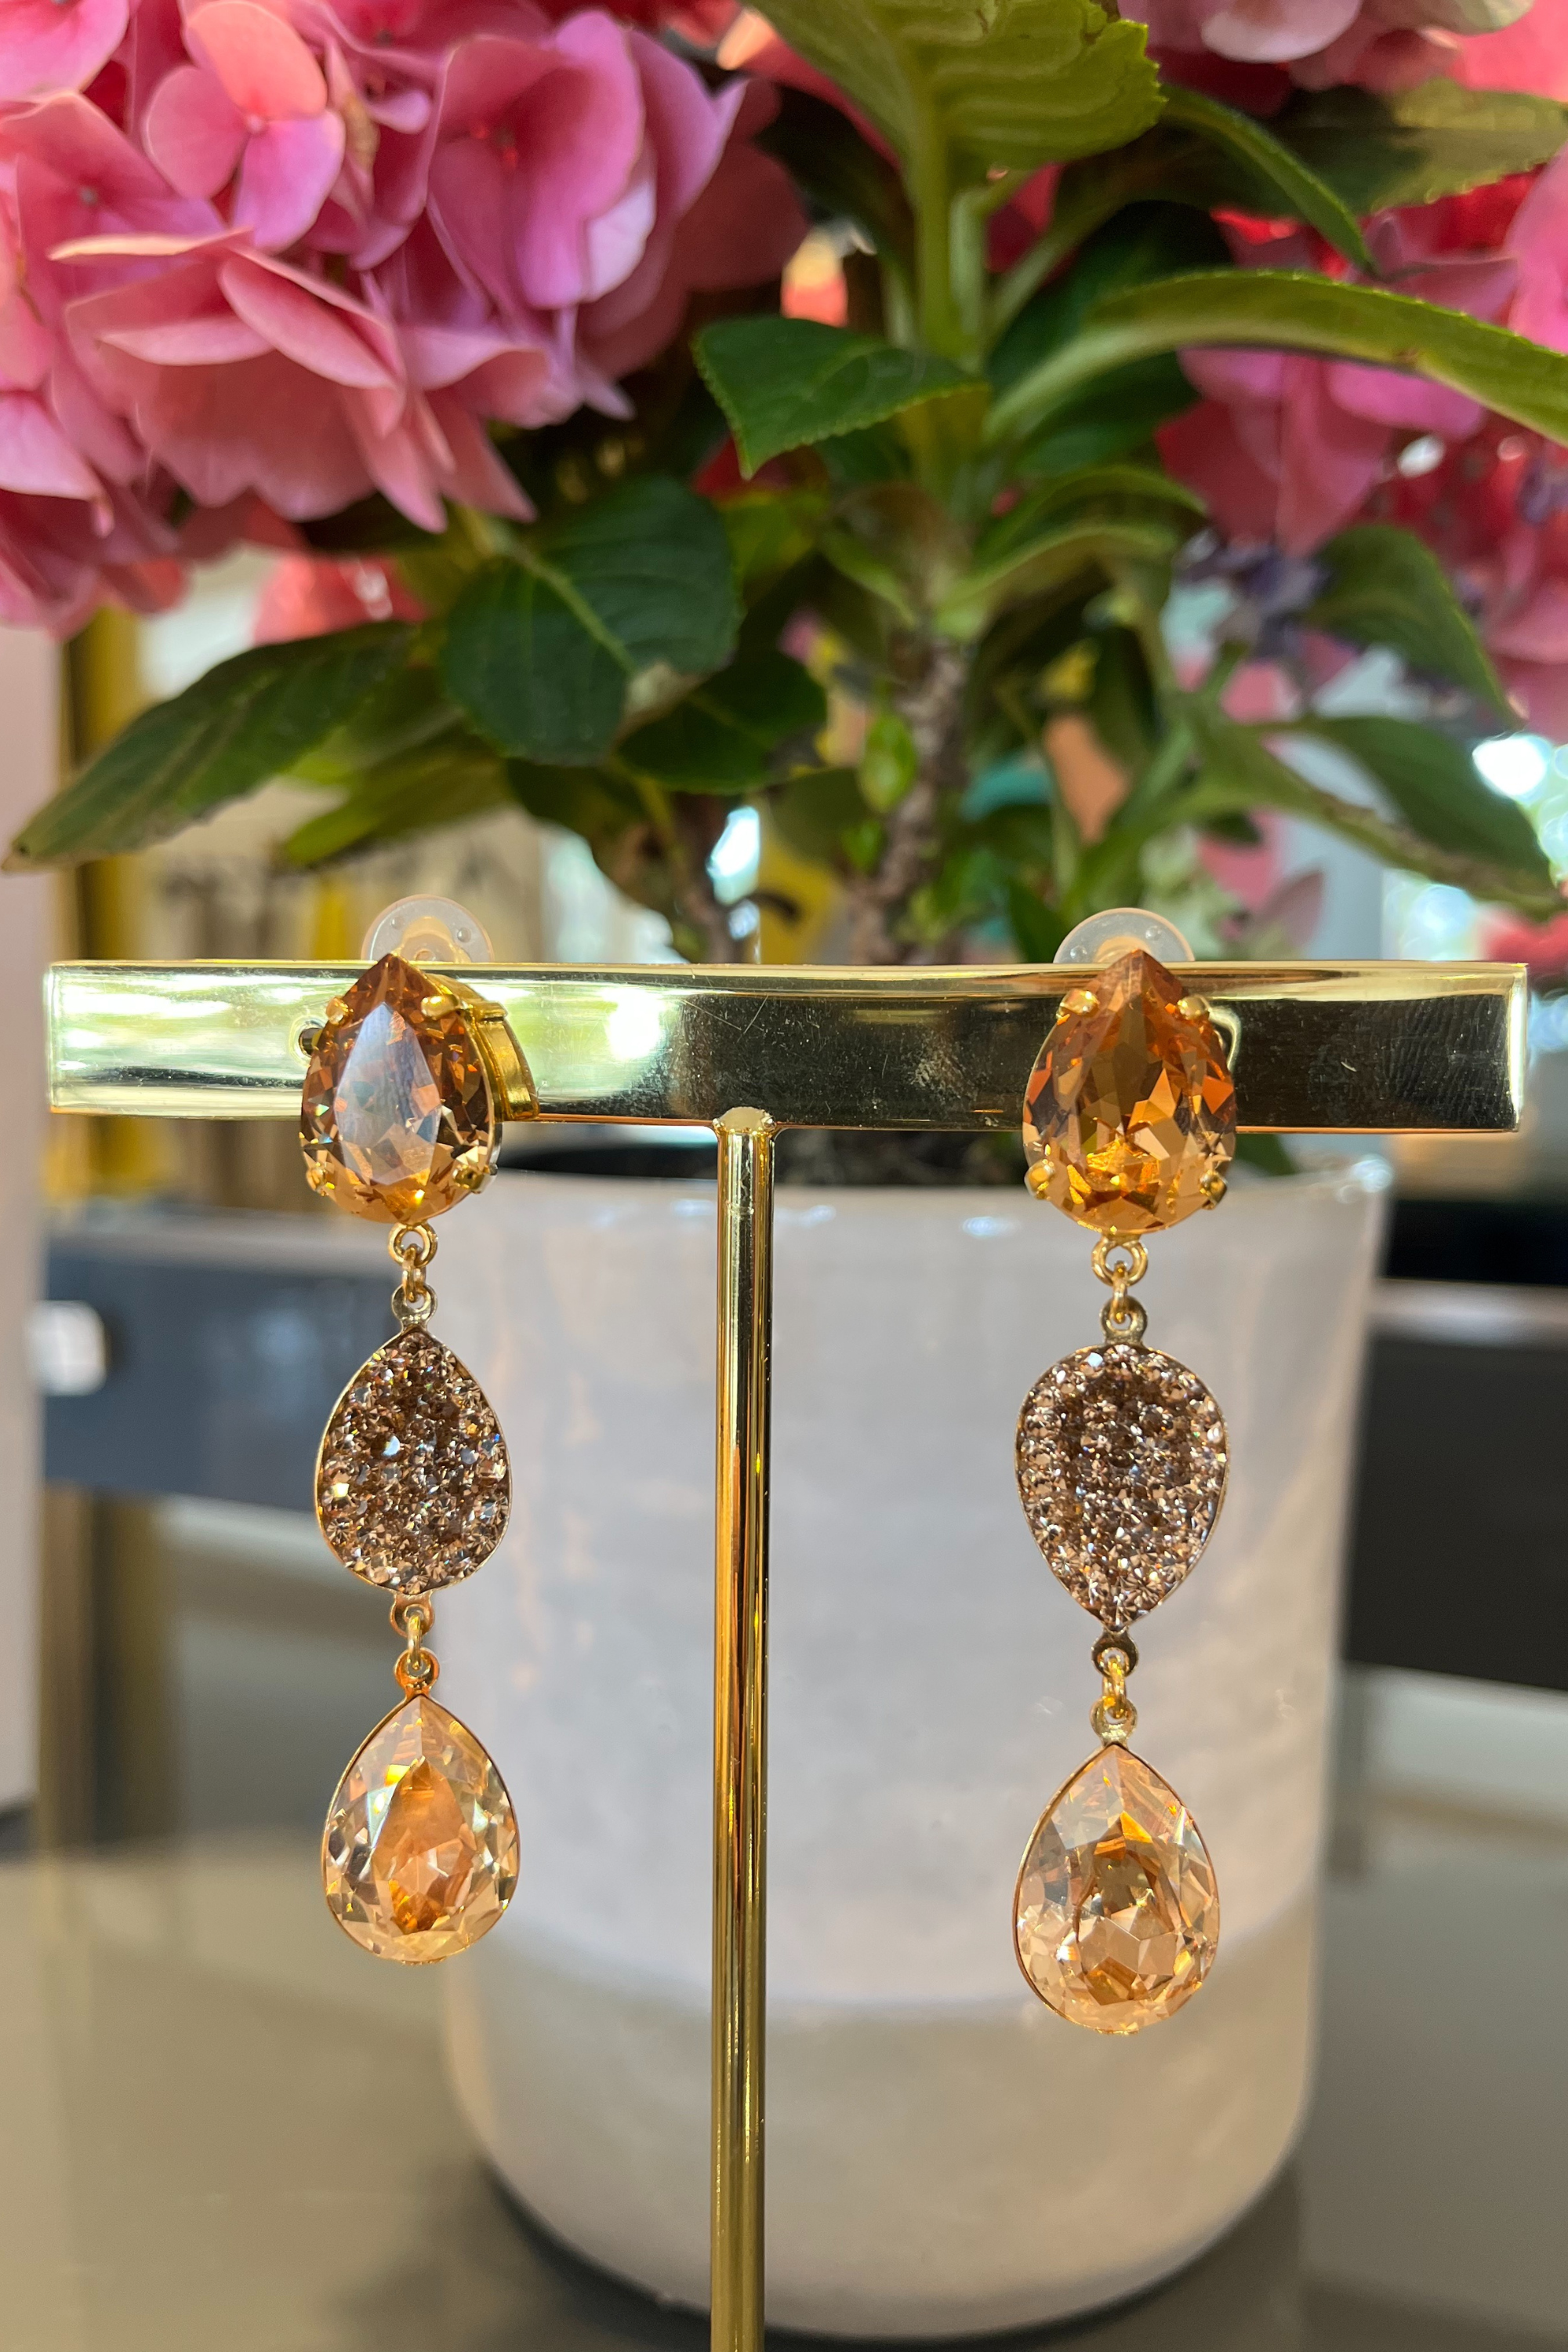 Swarovski Crystal Drop Earrings by Melissa Kandiyoti, Colour: Amber/silver/rose, Swarovski crystal, Belgium brand, Made in France, New Arrivals at Espace Cannelle